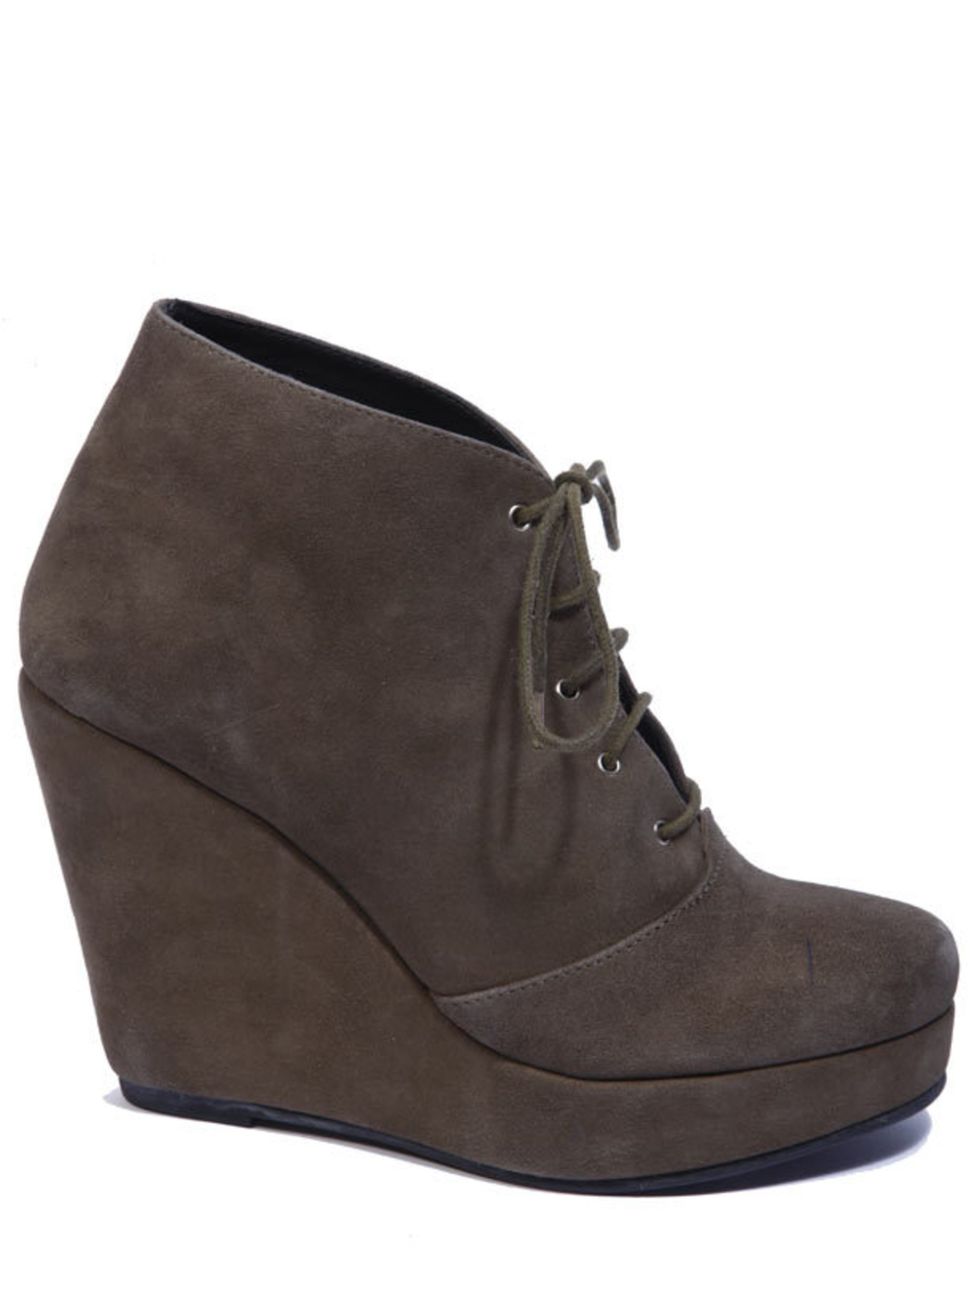 <p><a href="http://www.bstorelondon.com/shopping/women/boots/items.aspx">b store</a> wedge ankle boots, £255</p>